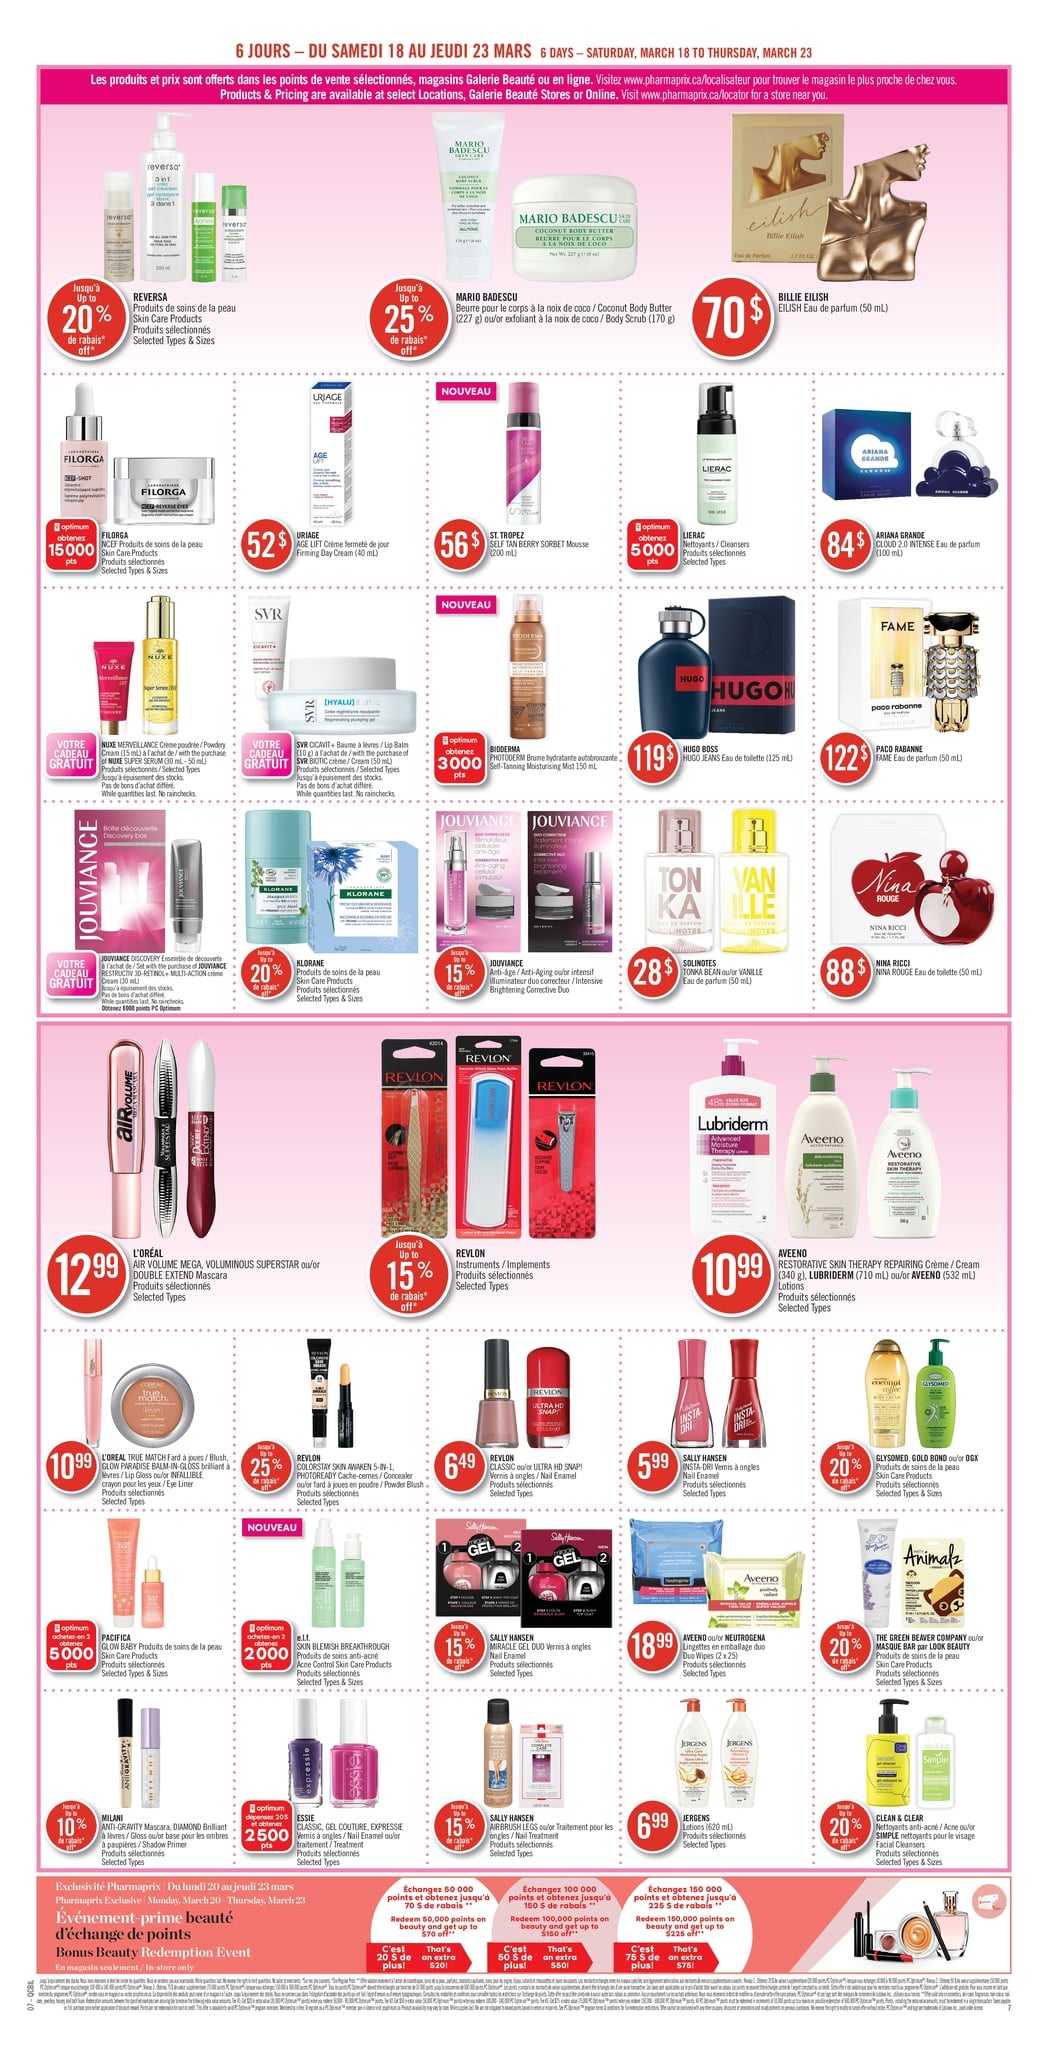 Pharmaprix - Weekly Flyer Specials - Page 11